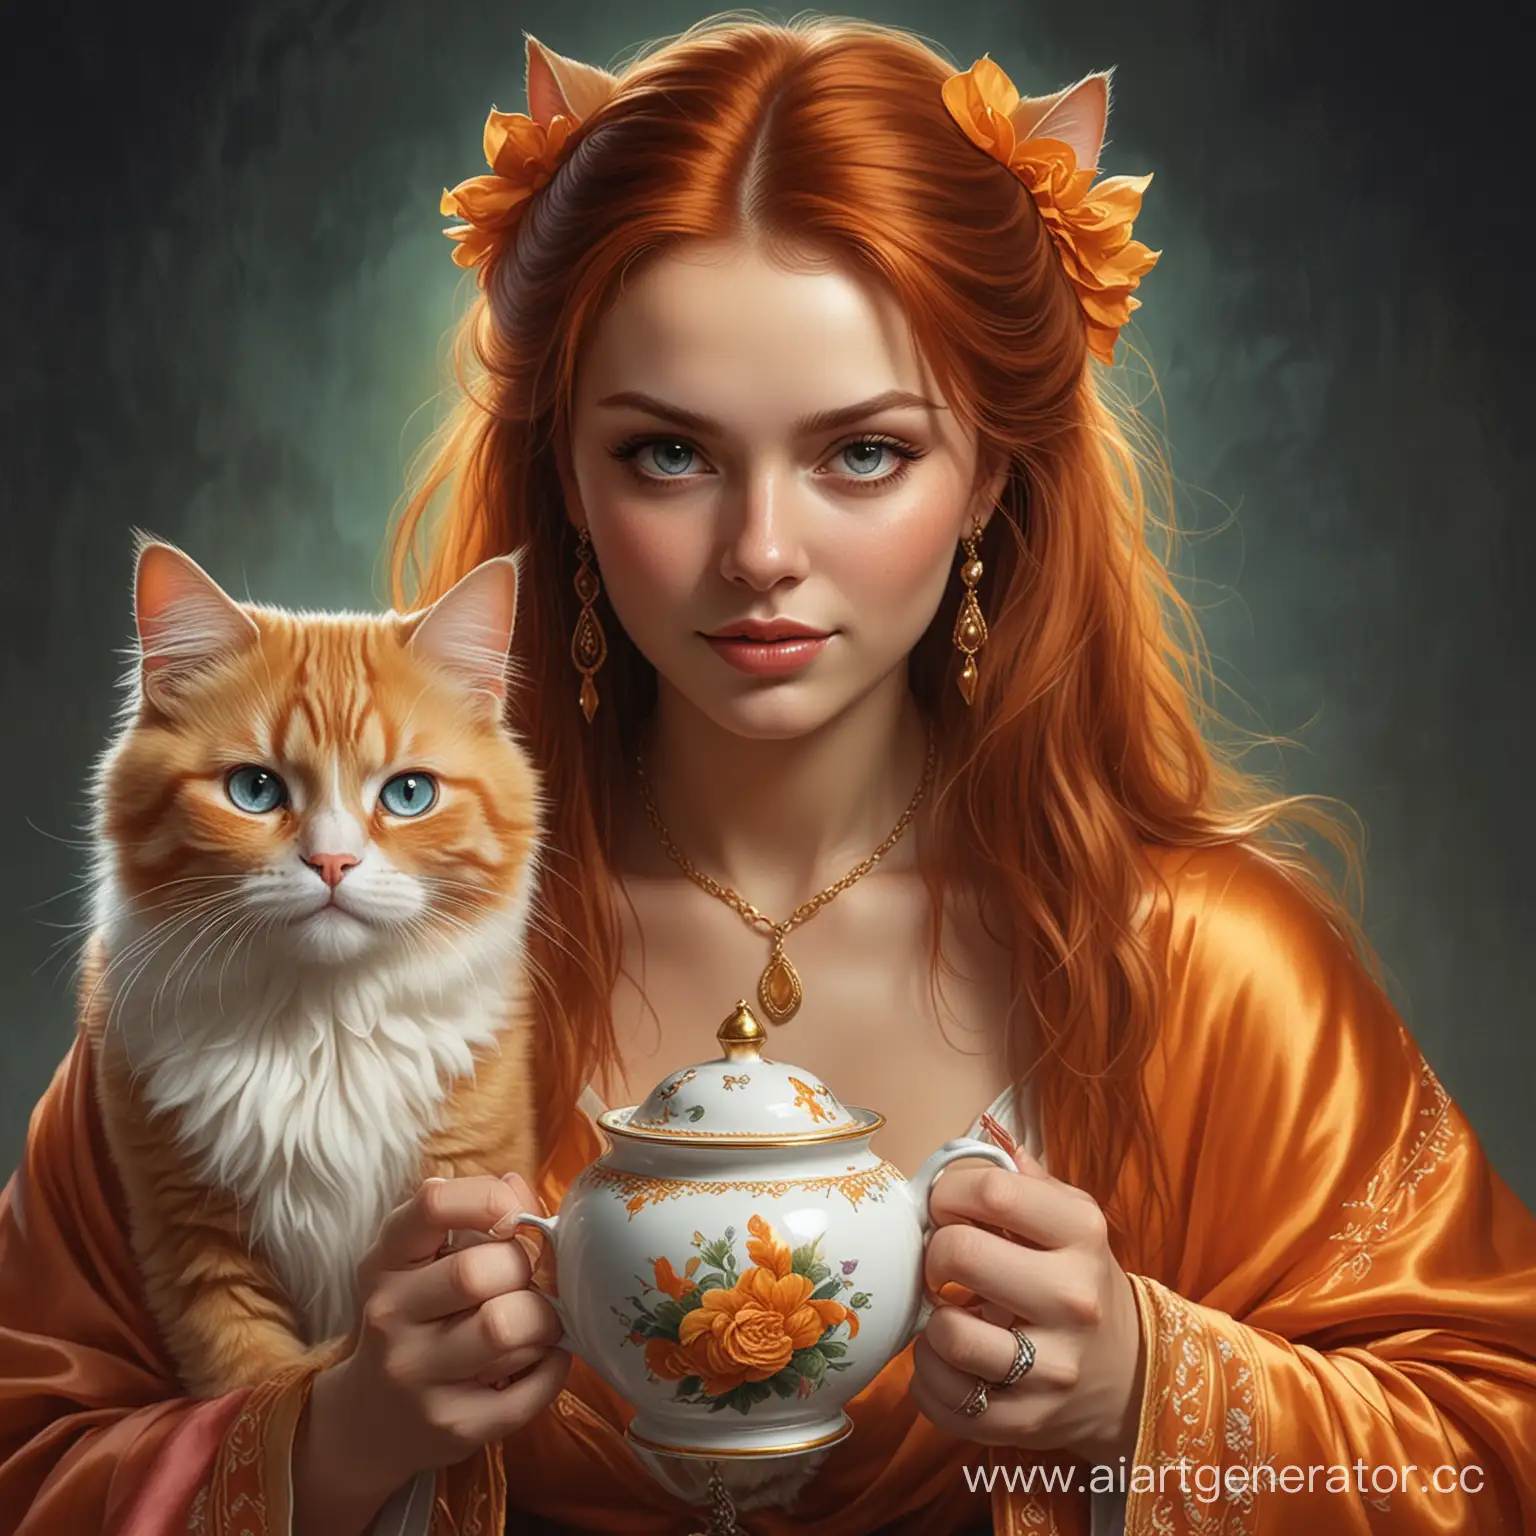 Enchanting-Sorceress-Brewing-Tea-with-Fluffy-Ginger-Cat-Illustration